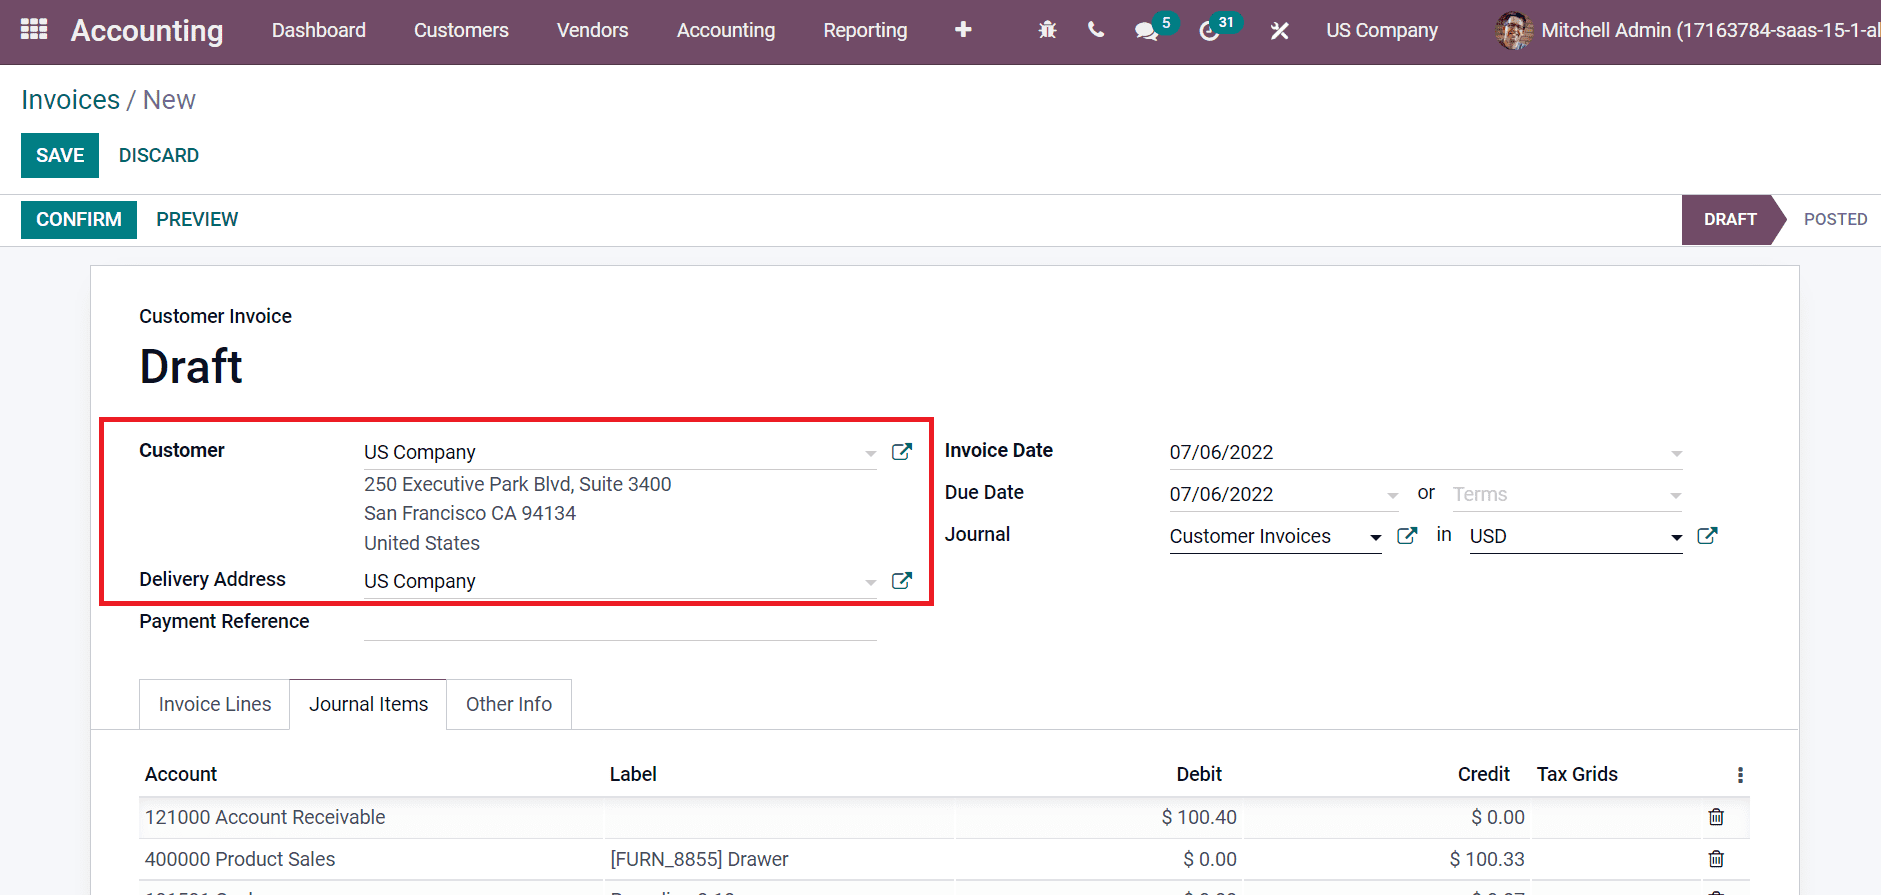 how-to-manage-cash-rounding-in-odoo-15-accounting-cybrosys